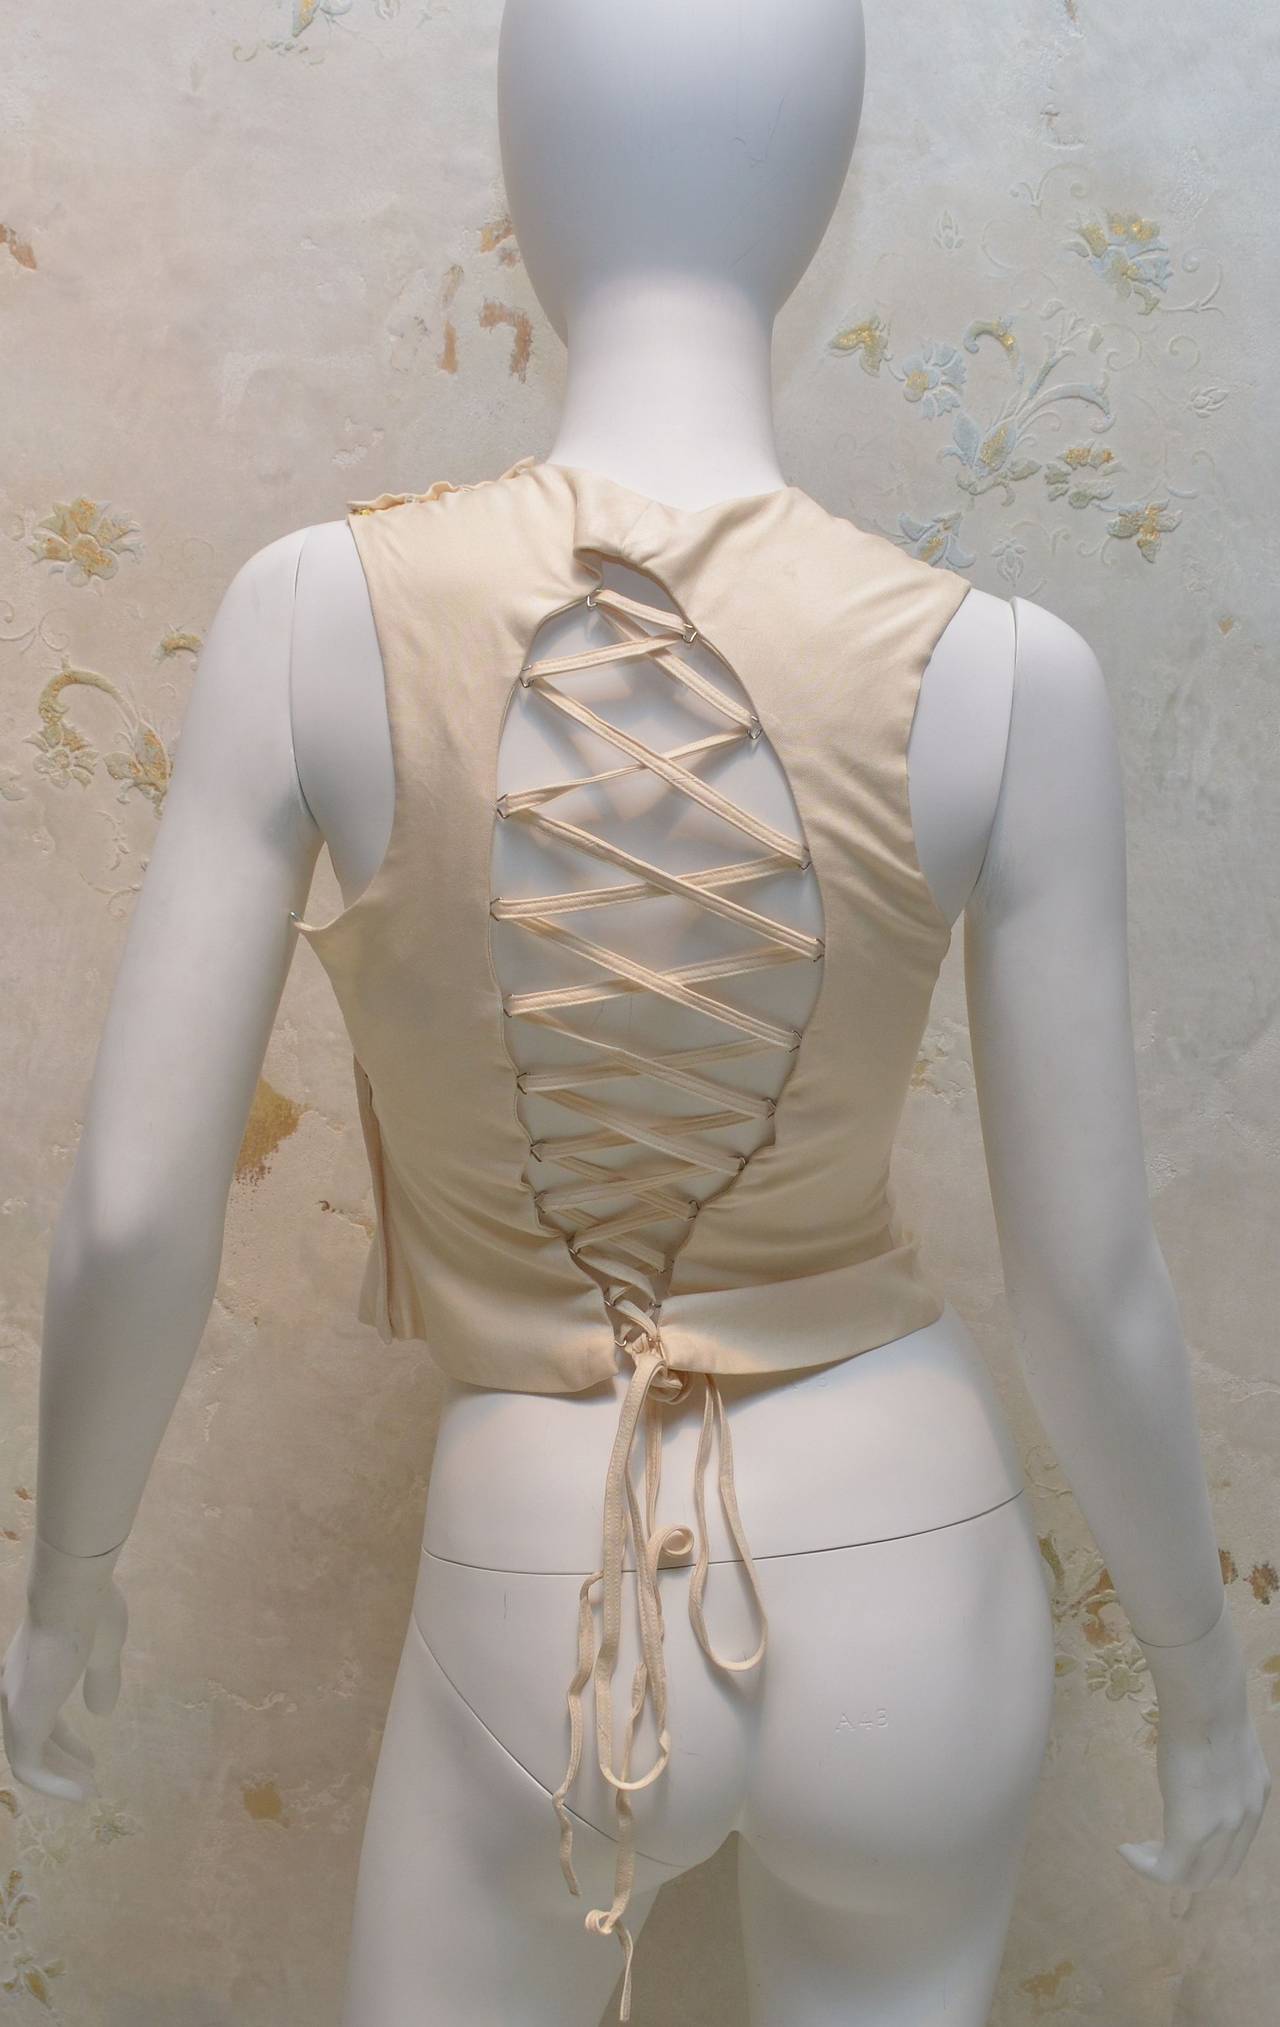 Brown 2002 Gianni Versace Cream Laced Back Blouse